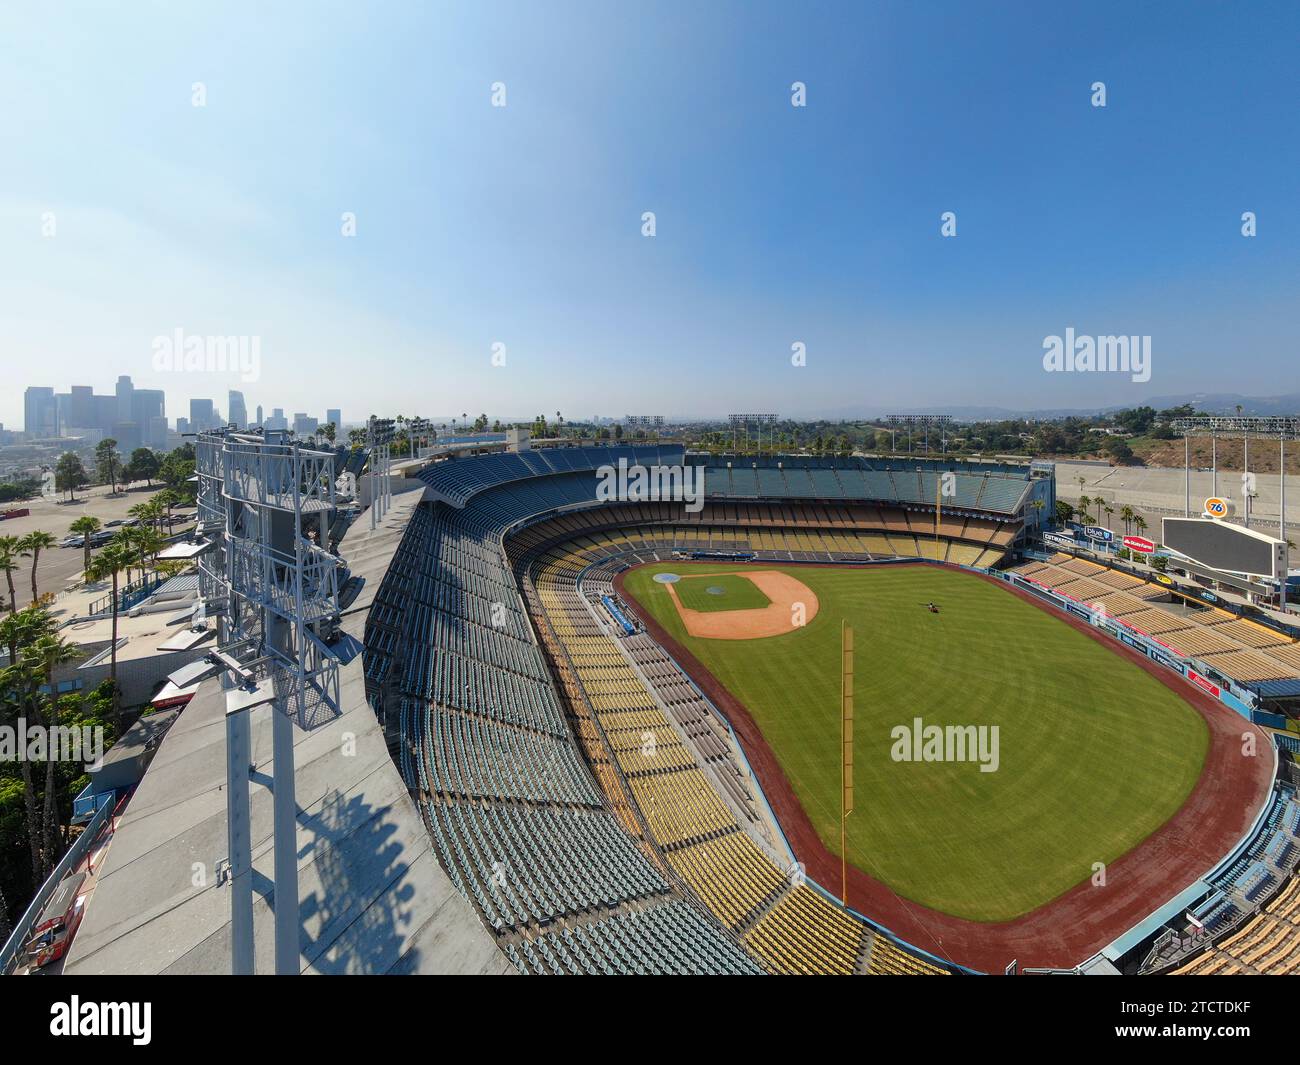 Drone images of Dodger Stadium with the Los Angeles skyline visible in a few shots. Stock Photo